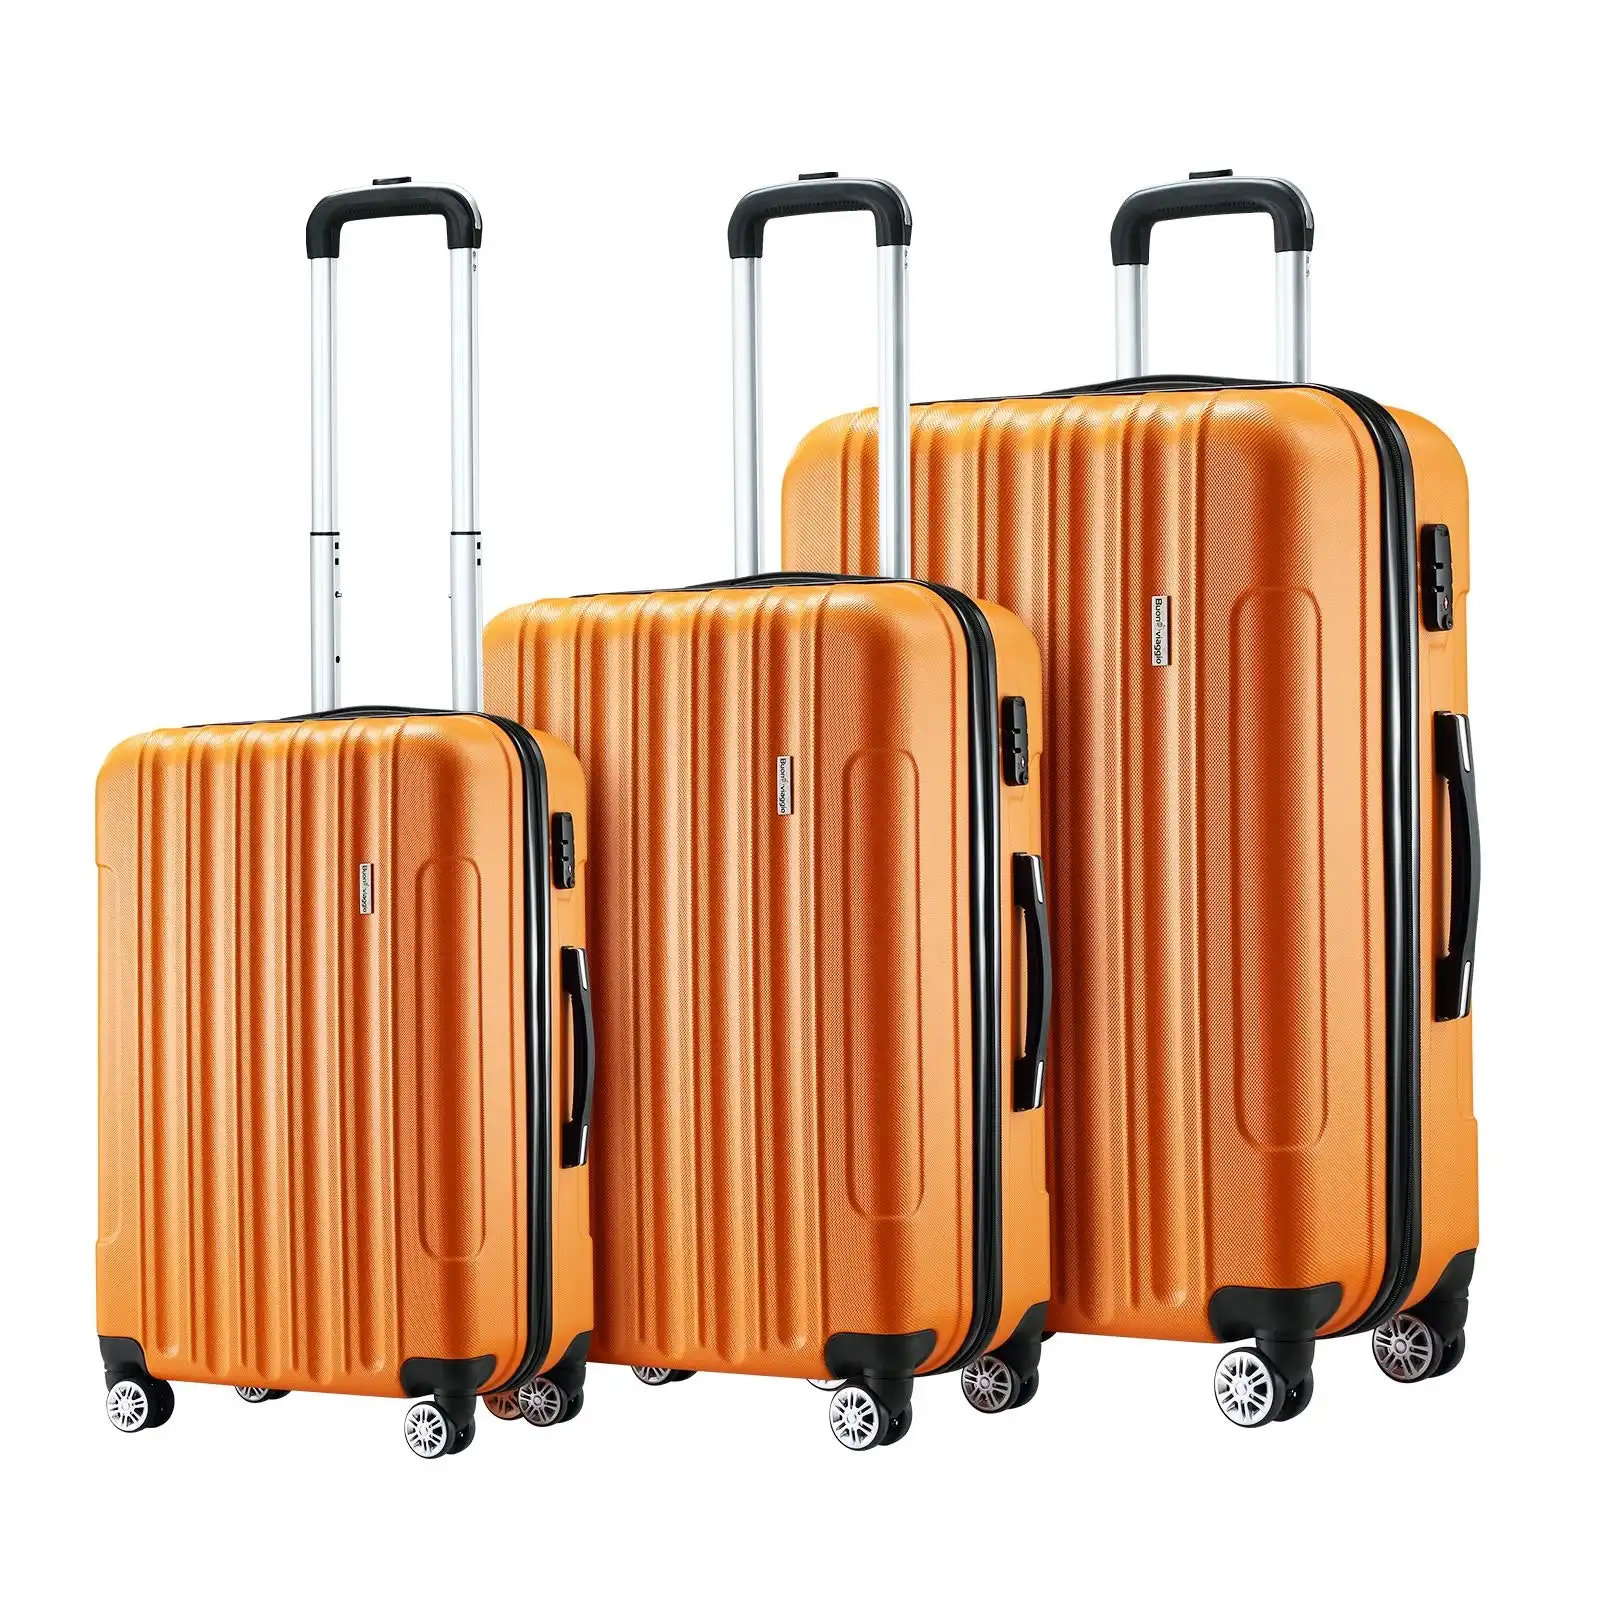 Buon Viaggio 3PCS Luggage Suitcase Set Hard Carry On Travel Trolley Lightweight with TSA Lock and 2 Covers Orange